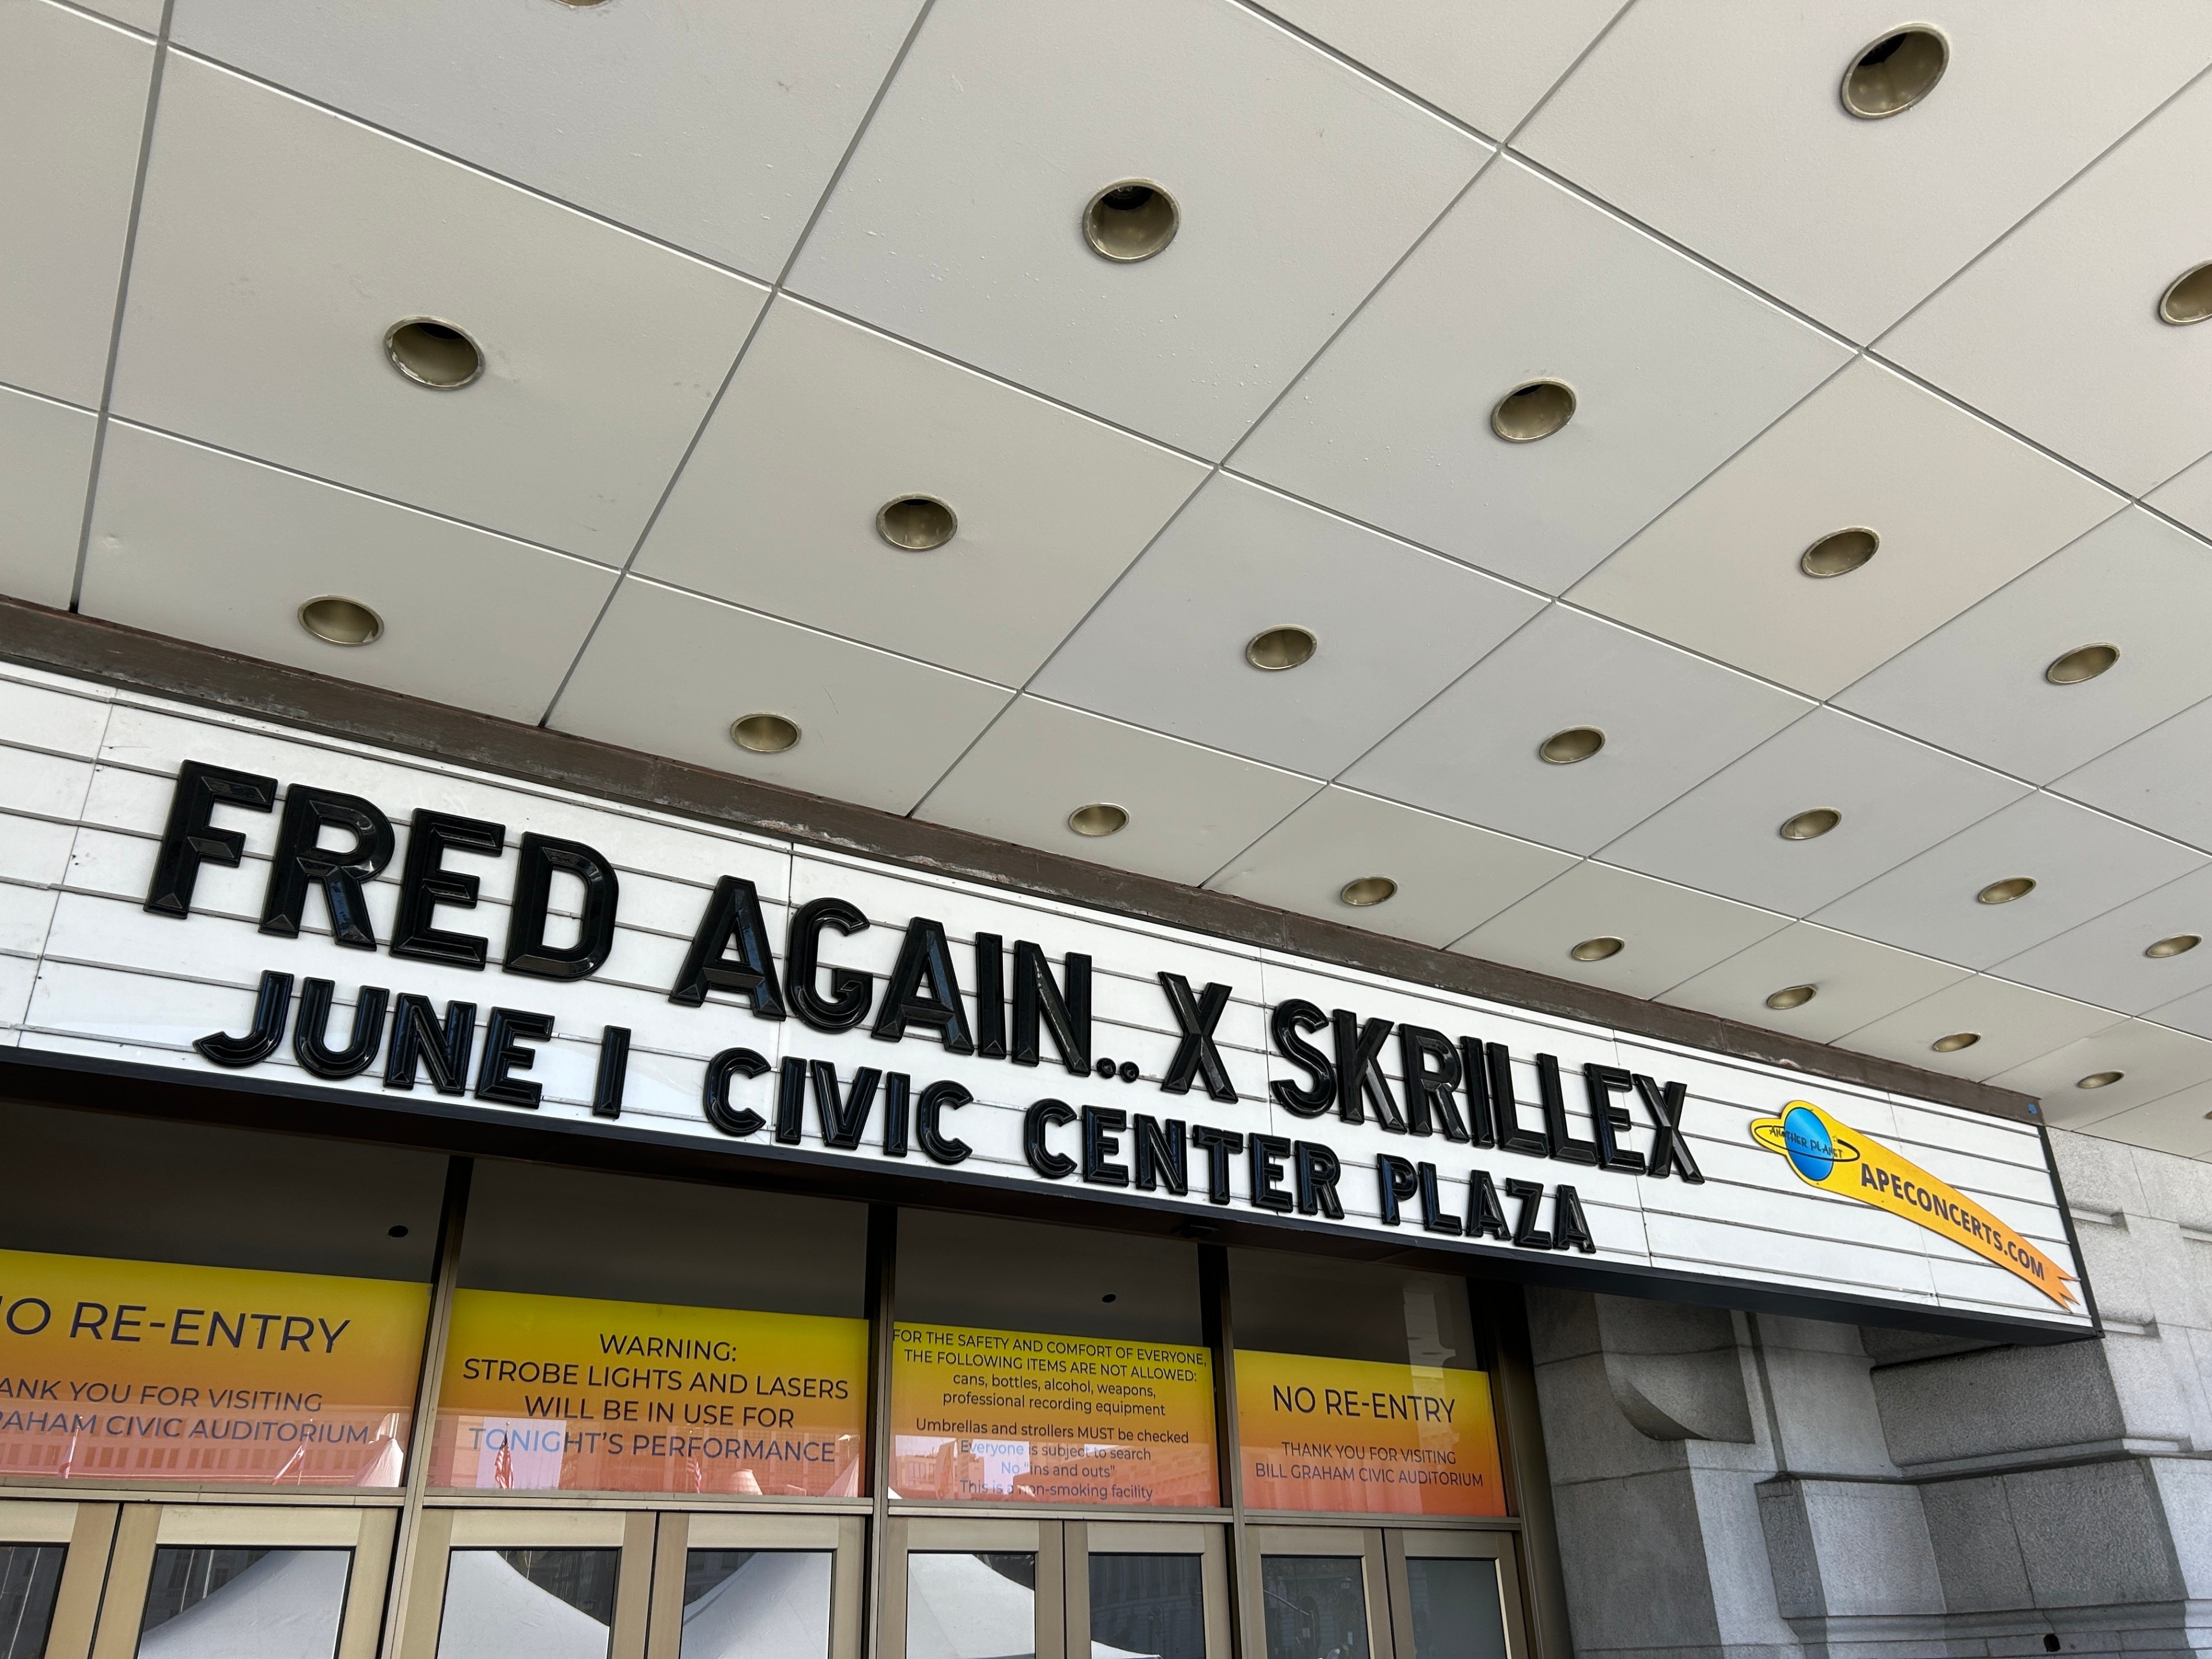 A marquee reads &quot;FRED AGAIN.. X SKRILLEX JUNE 1 CIVIC CENTER PLAZA.&quot; Below are doors and signs about re-entry, strobe lights, and safety information.